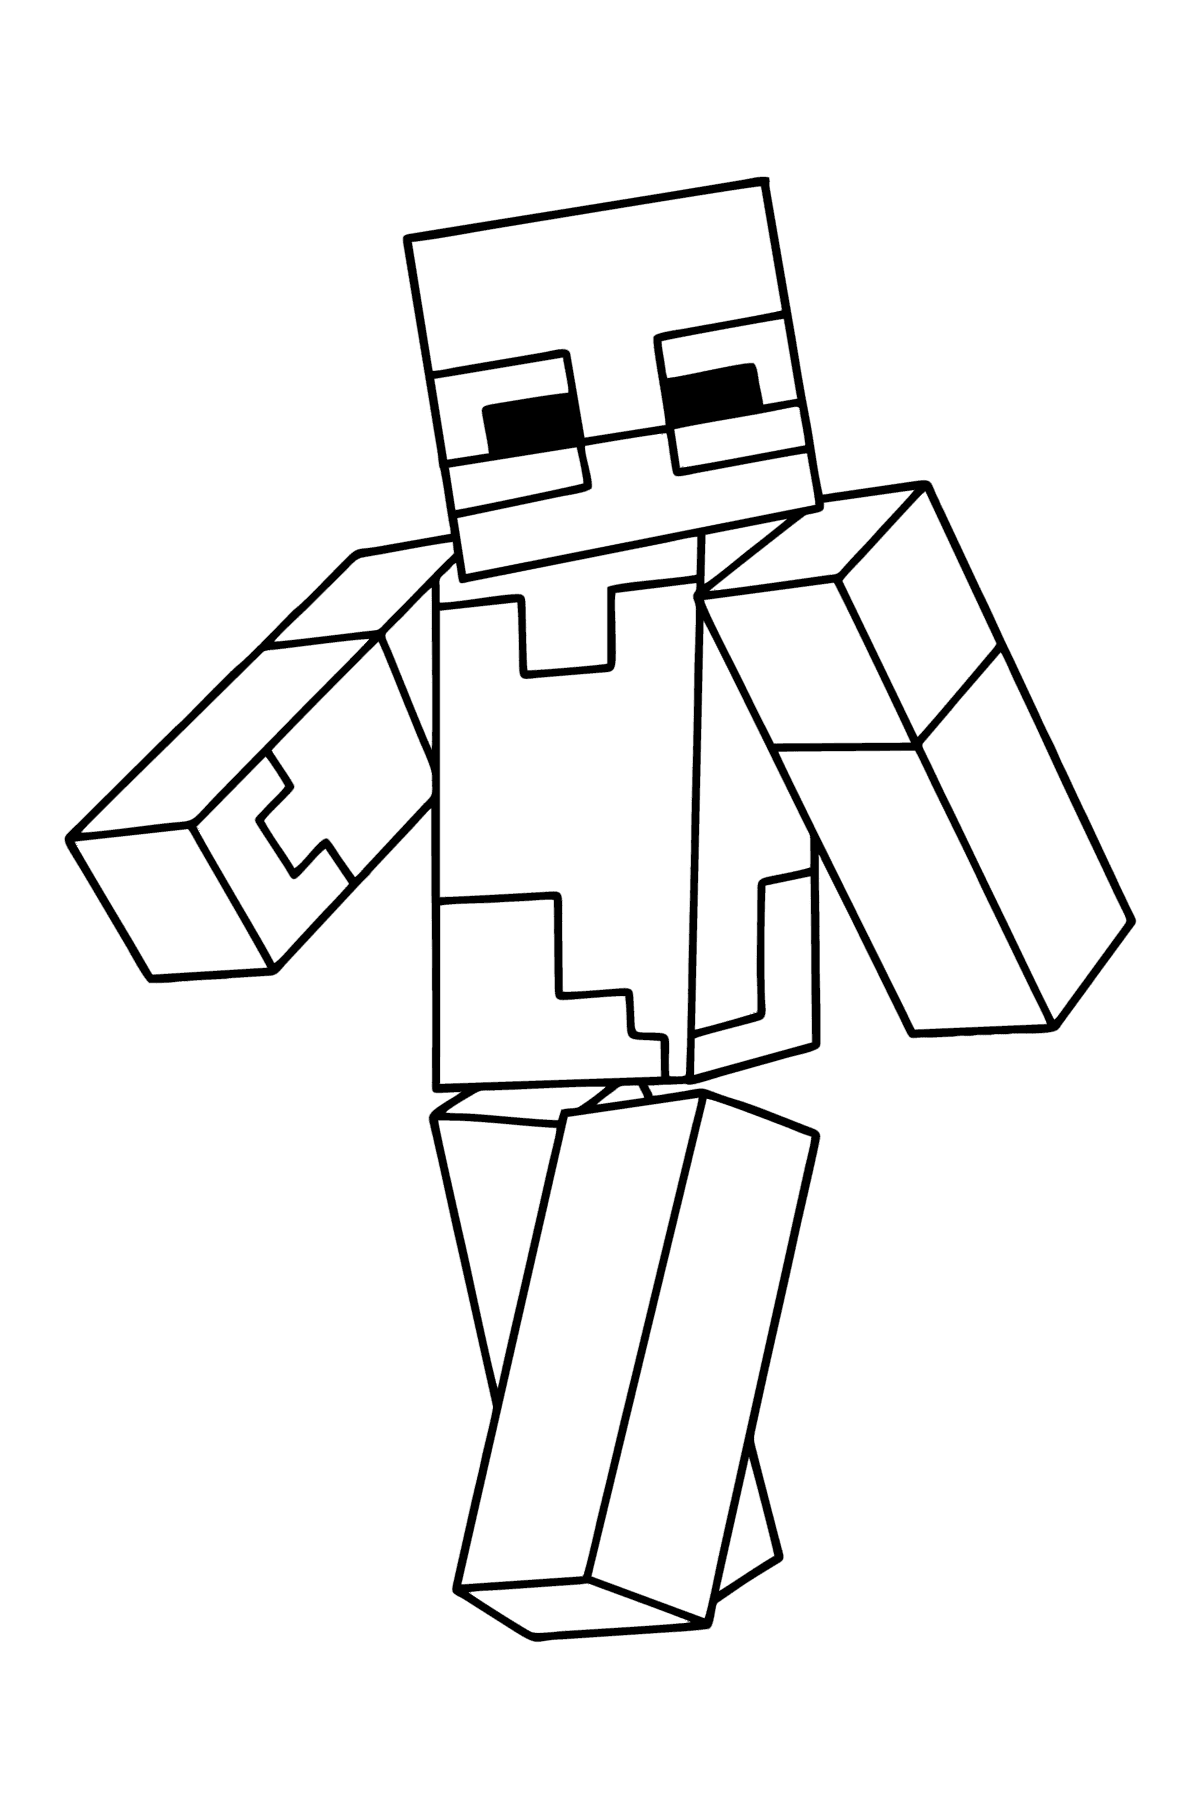 Minecraft Zombie coloring page - Coloring Pages for Kids